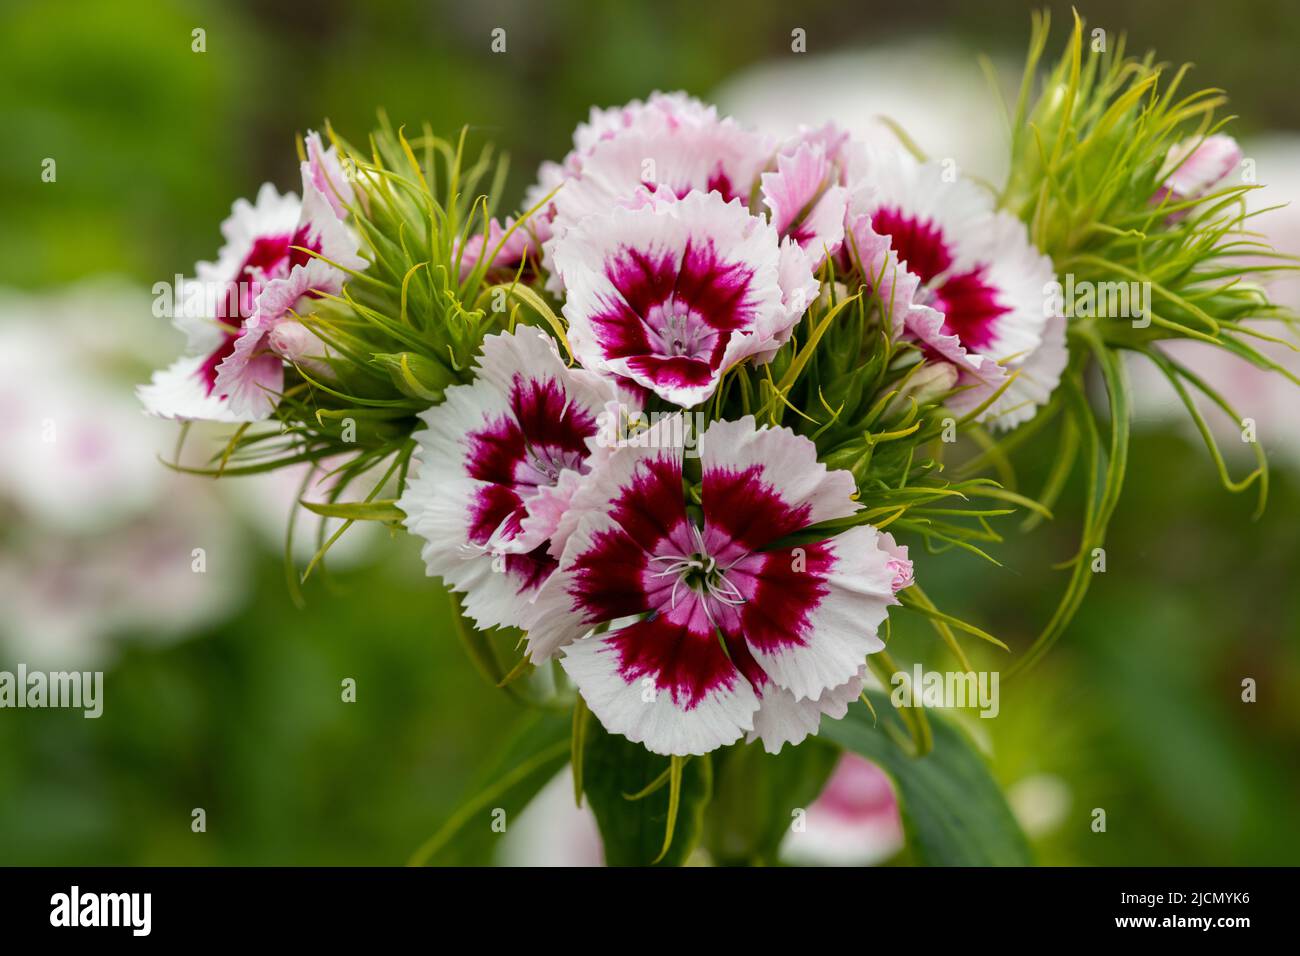 Close up of pink and white dianthus flowers in bloom Stock Photo